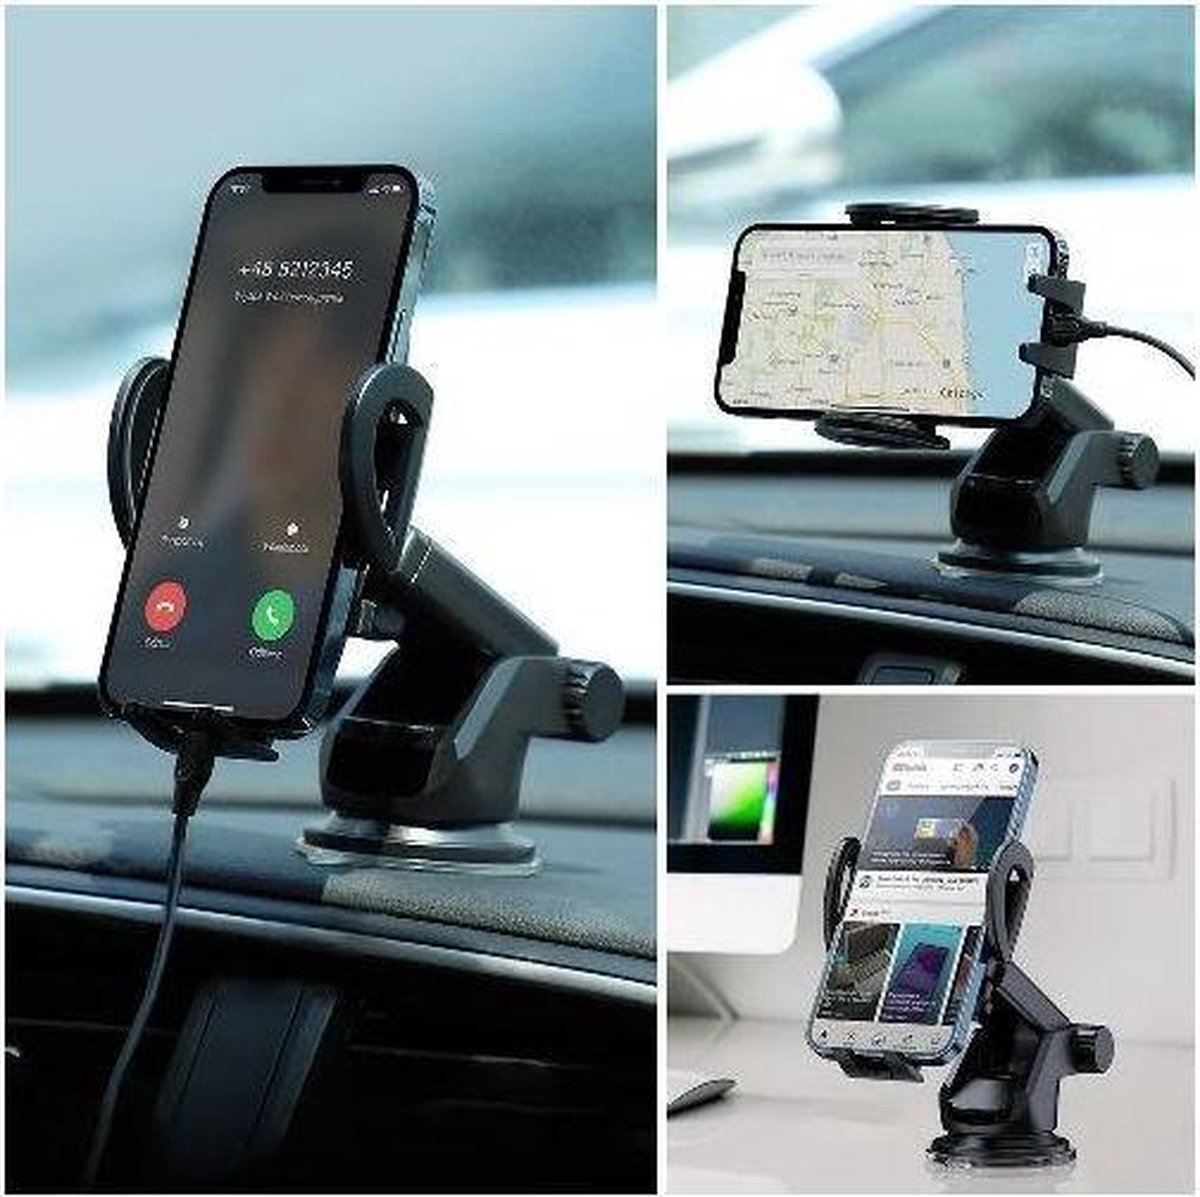 BDCOOL Support Telephone Voiture Ventouse Support Telephone Voiture Ventilation Universel Support Voiture 3 en 1 Rotation 360° Tableau de Bord Voiture Pare-brise pour Iphone Samsung Huawei Smartphones 